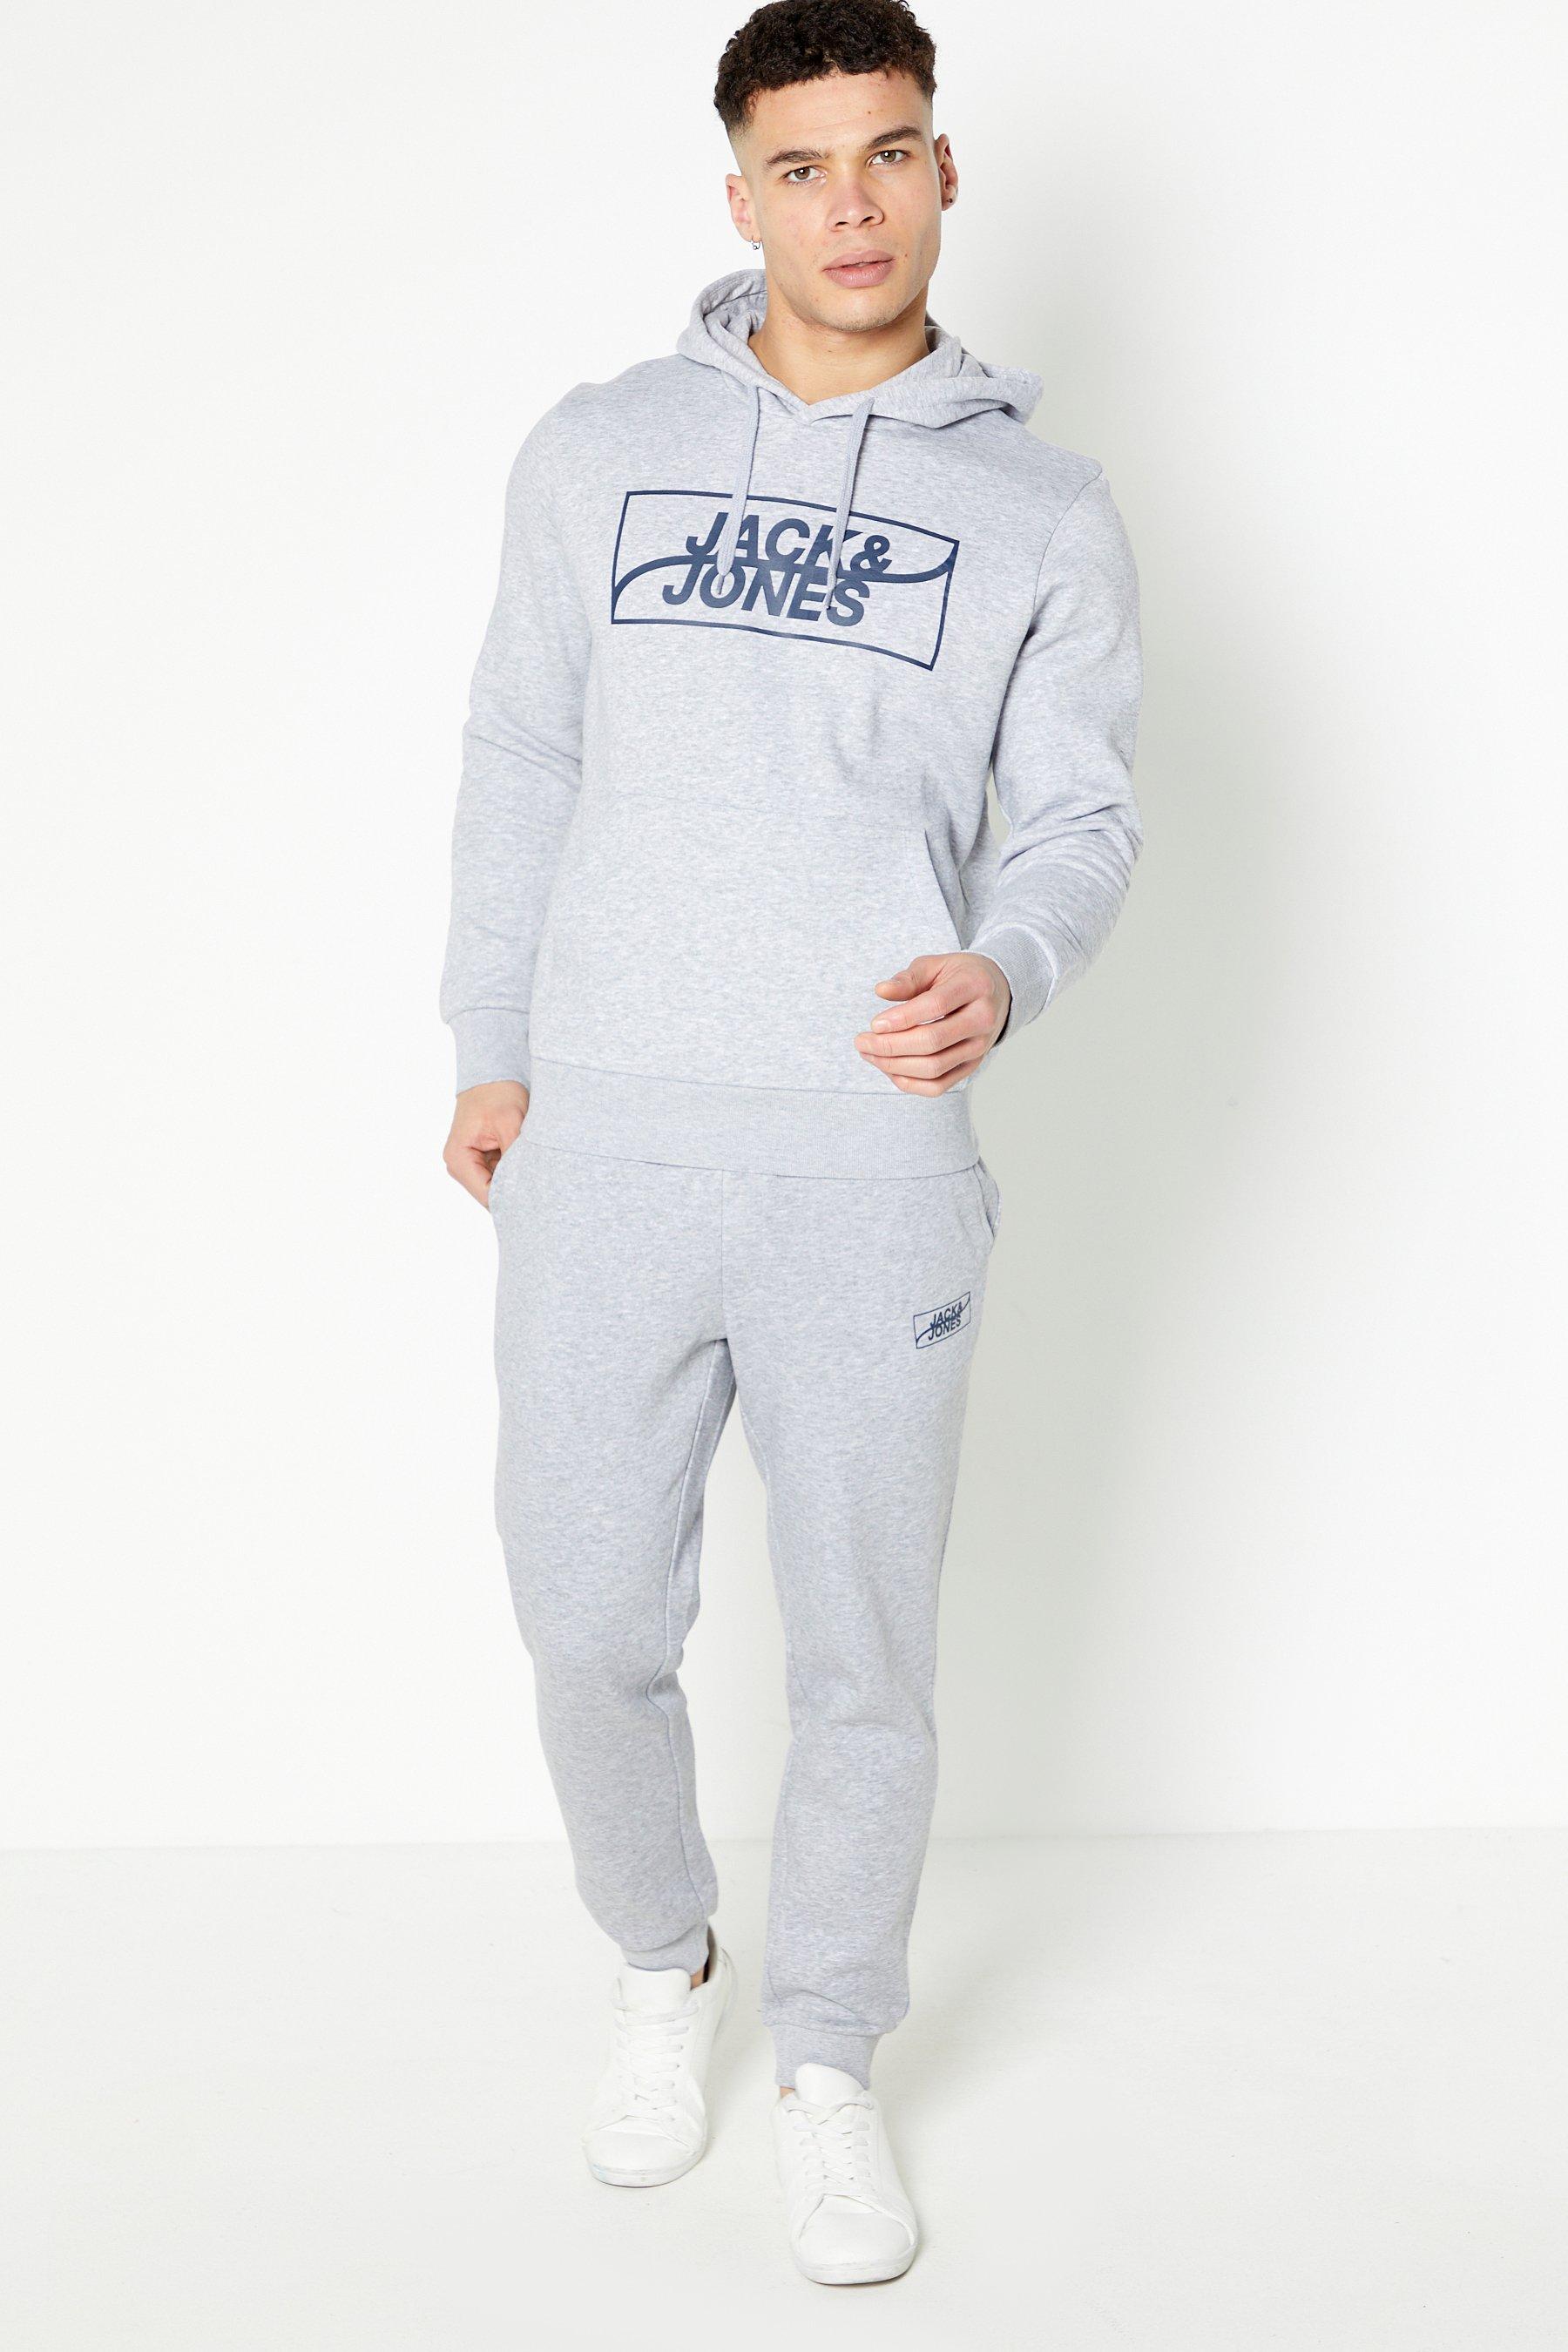 jack and jones fly hooded tracksuit - mens - grey - size: small